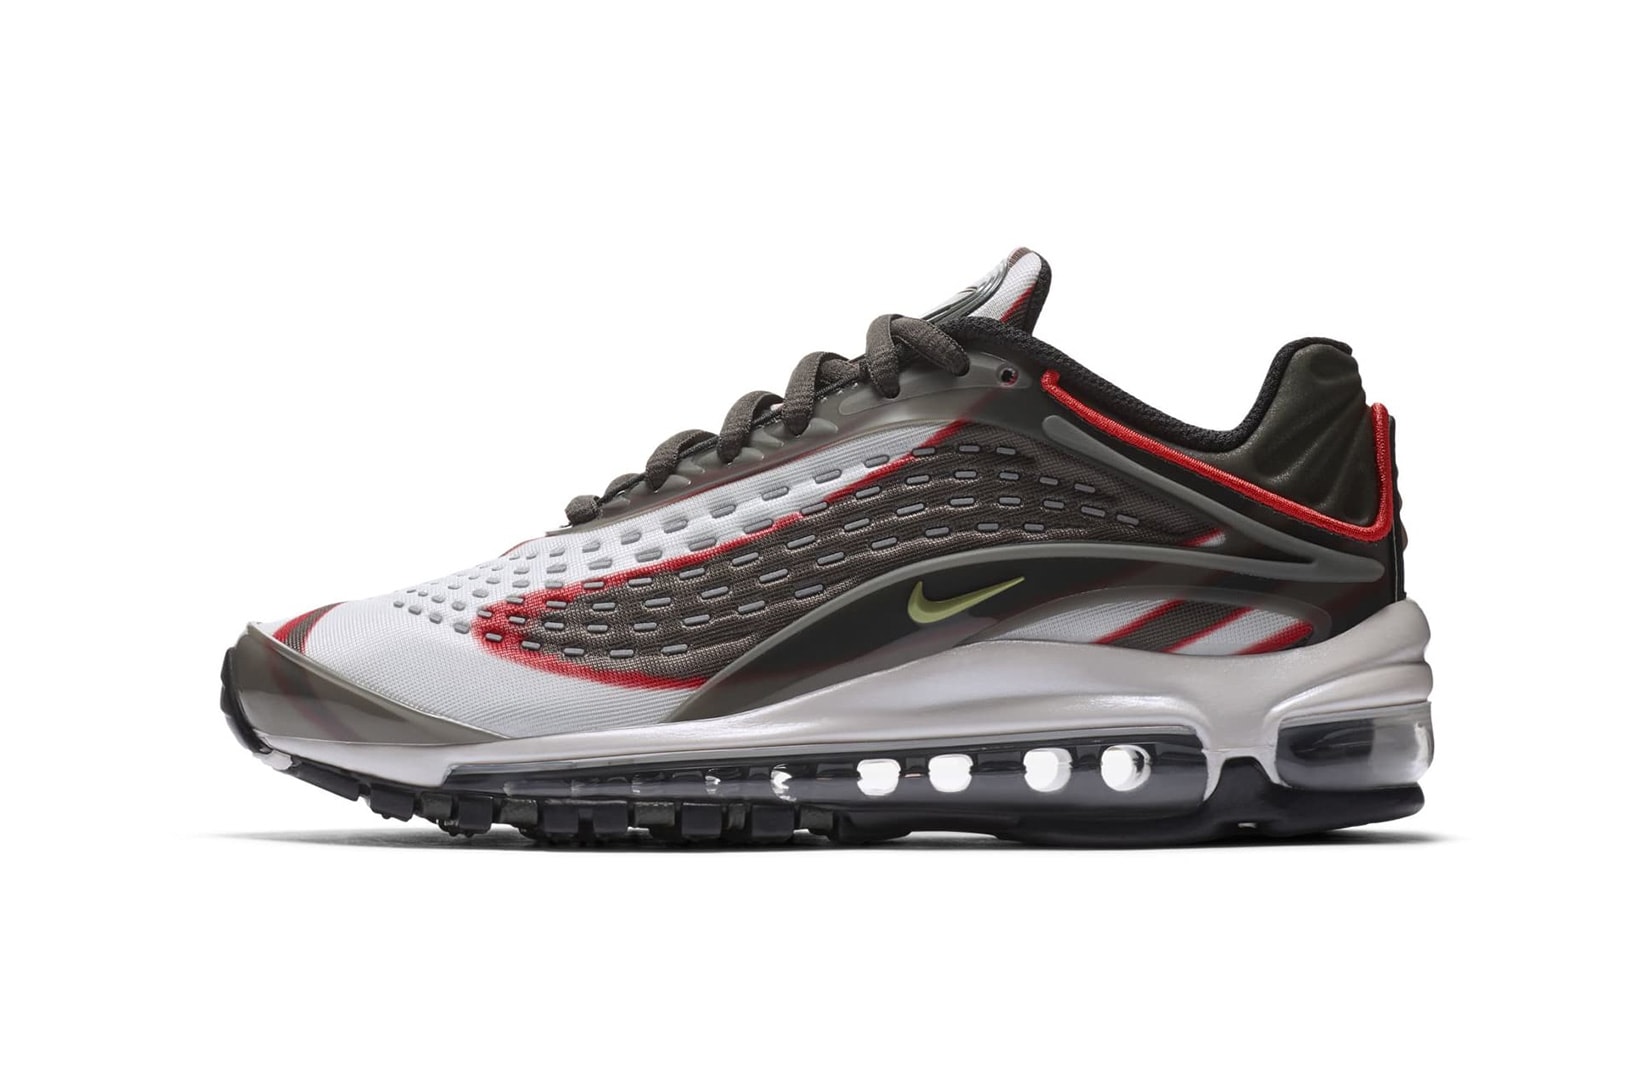 Nike Air Max Deluxe white black grey red midnight navy volt blue red nike sportswear 2018 footwear